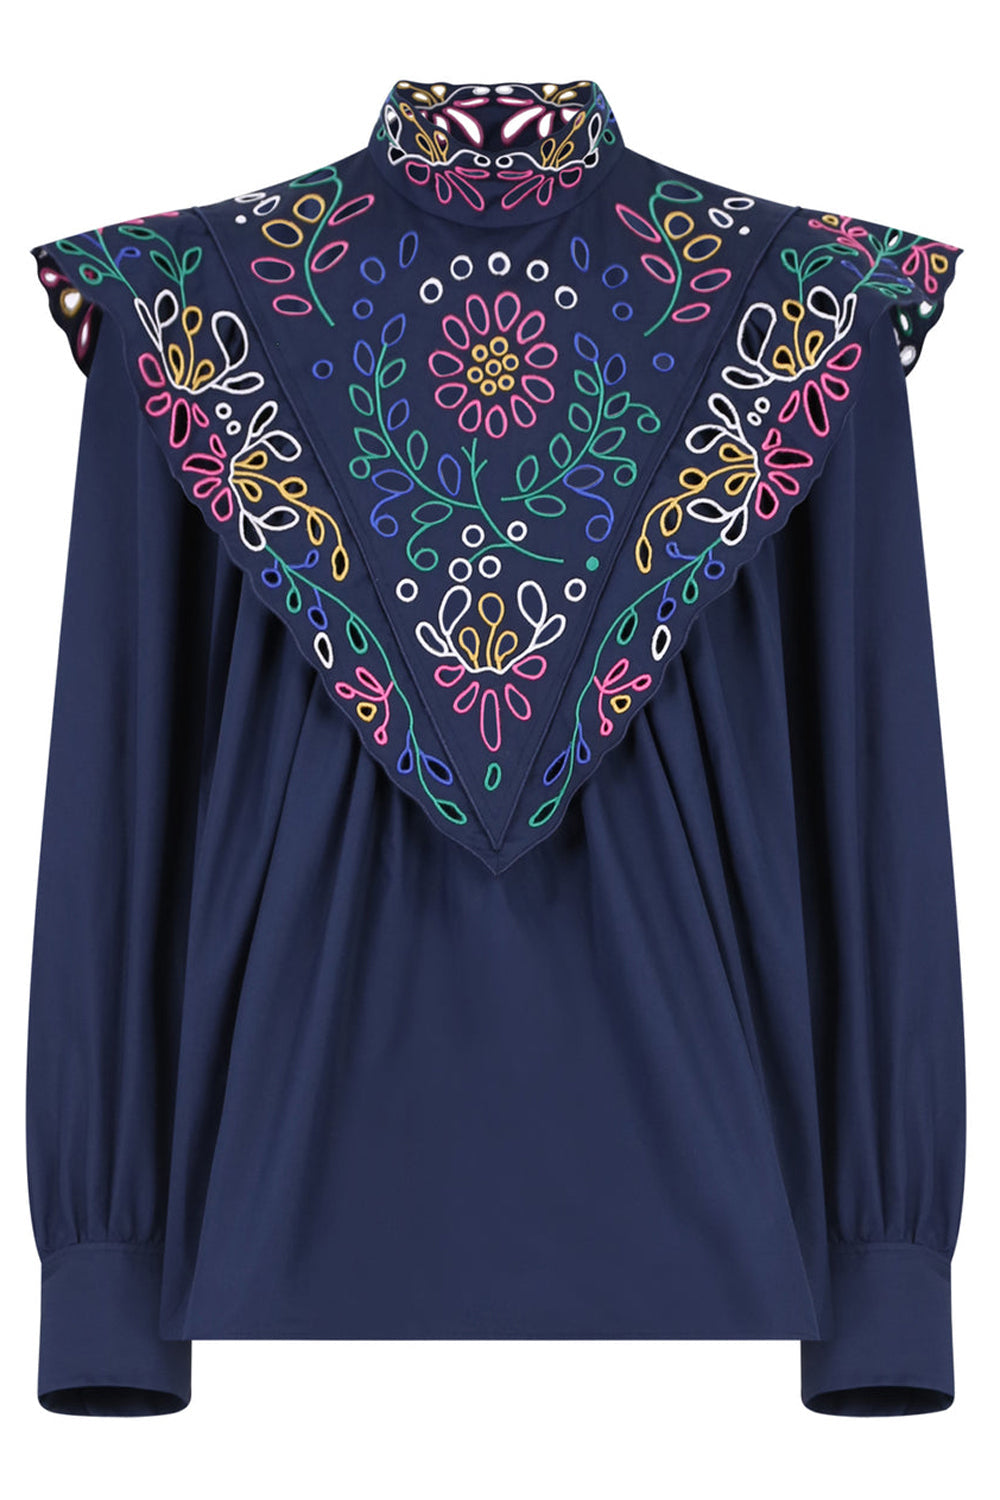 CHLOE RTW EMBROIDERED BLOUSE L/S NAVY